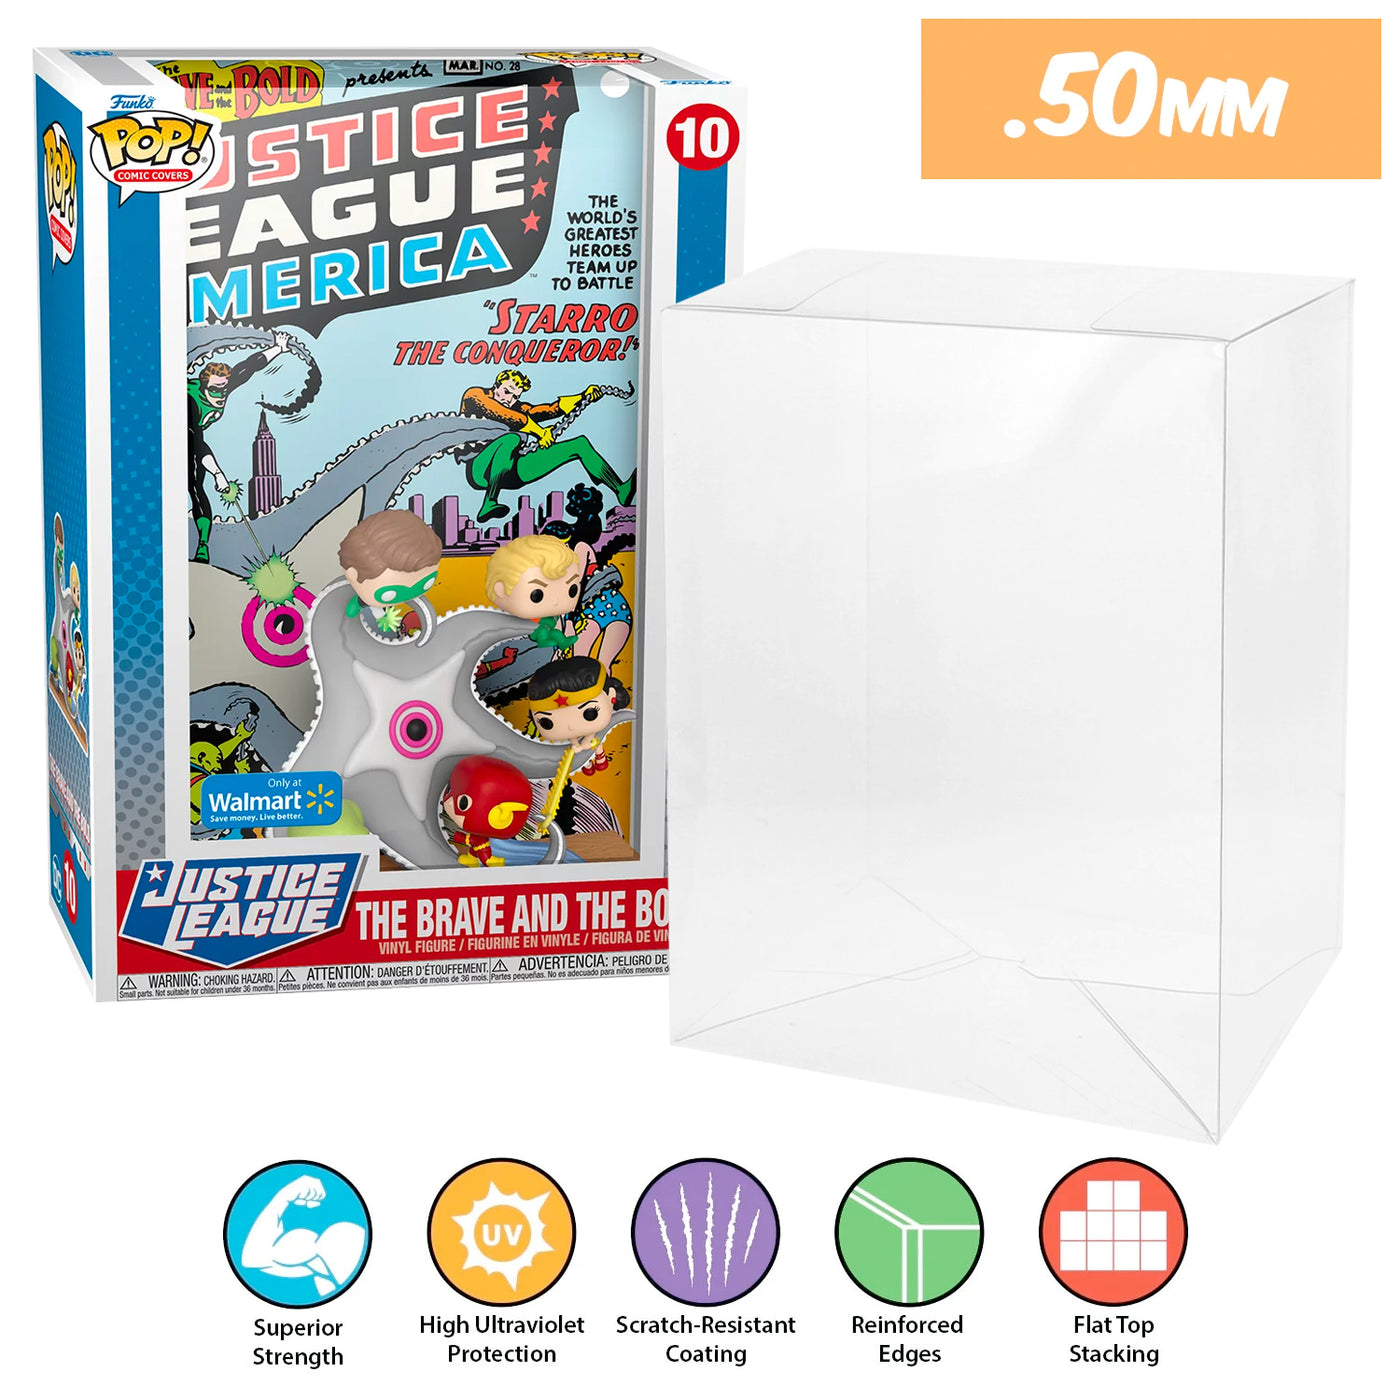 dc justice league the brave and the bold walmart pop comic covers best funko pop protectors thick strong uv scratch flat top stack vinyl display geek plastic shield vaulted eco armor fits collect protect display case kollector protector